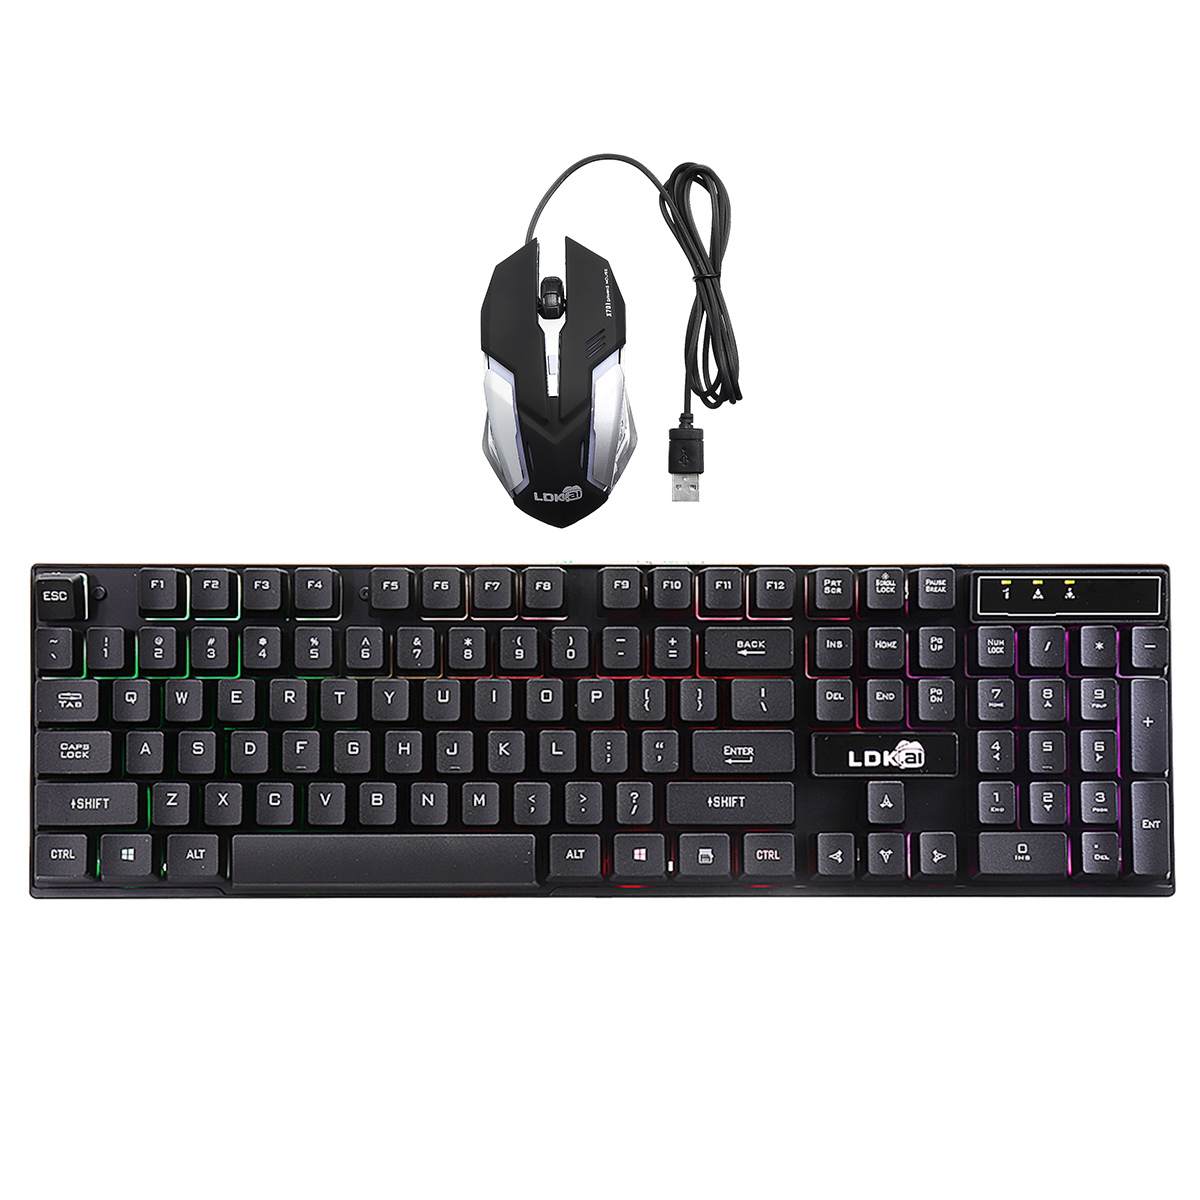 

104 Keys Colorful Backlight Gaming Keyboard USB Wired 2400 DPI Mouse for PC Laptop